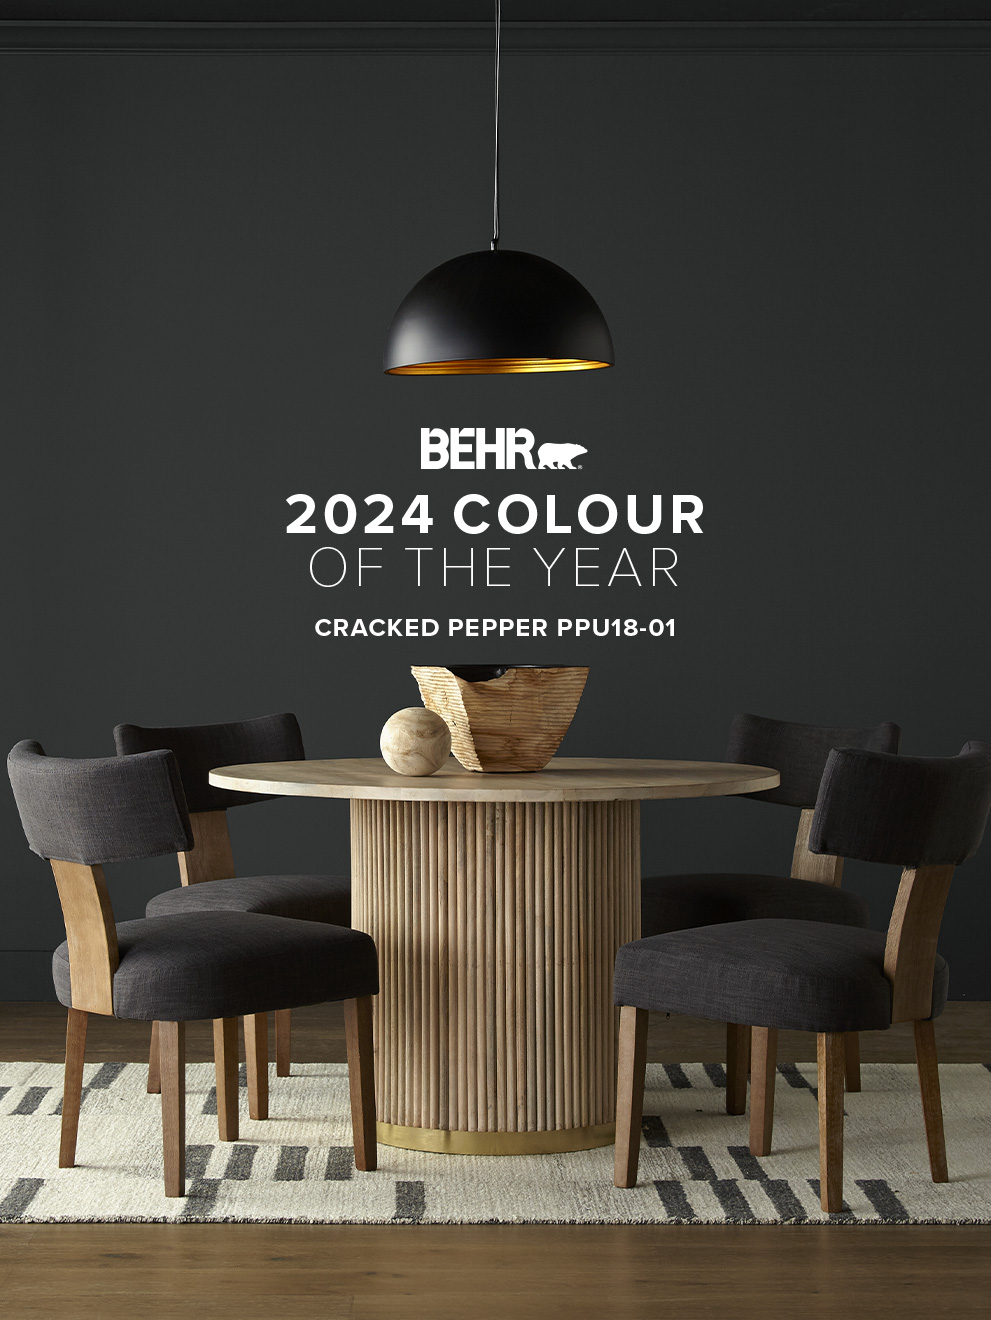 Cracked  Pepper PPU18-01- BEHR 2024 Colour of the Year